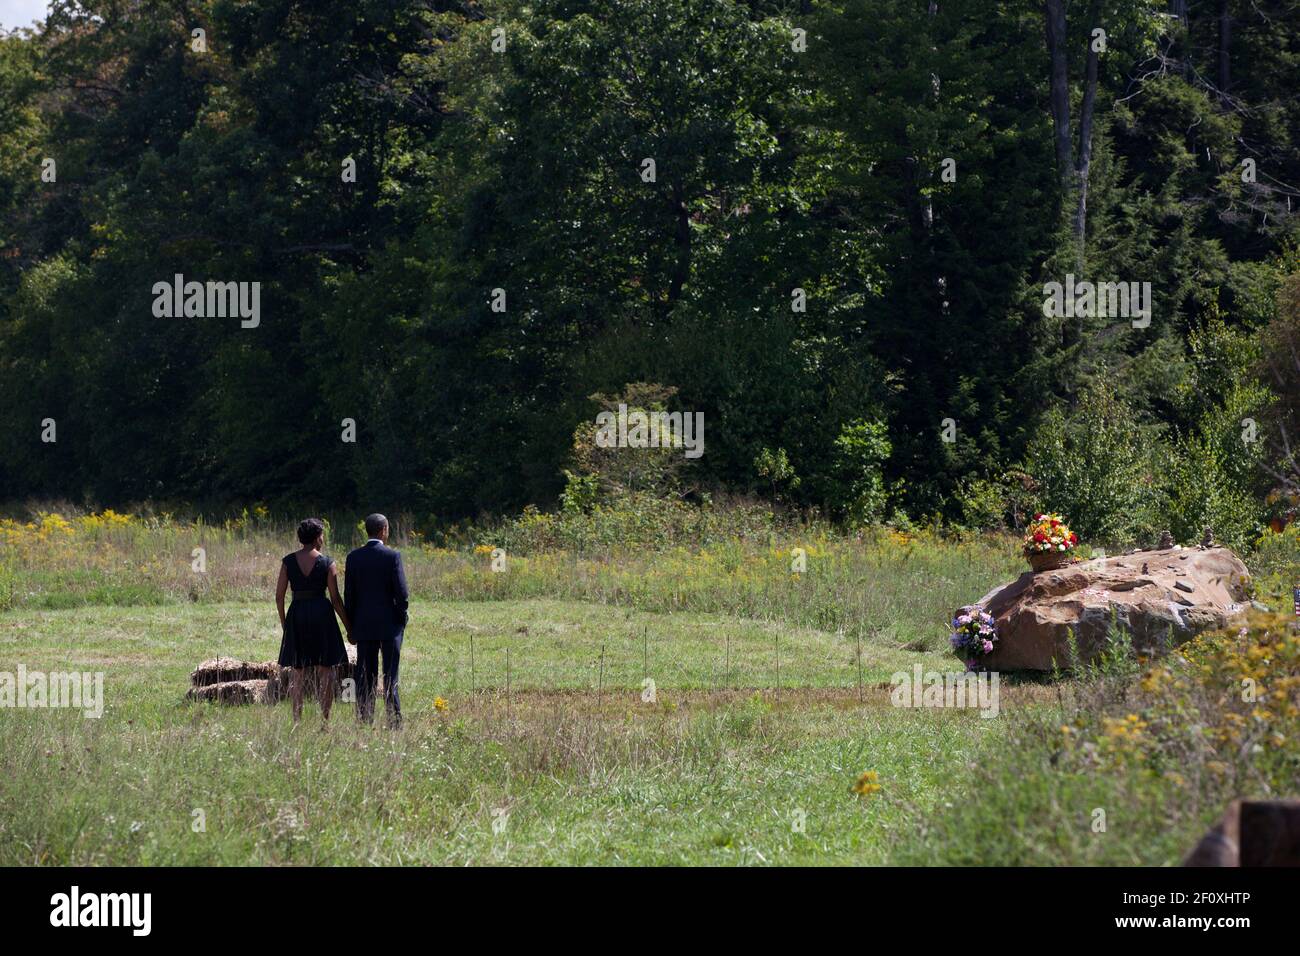 President Barack Obama and First Lady Michelle Obama visit the crash site following a ceremony at the Flight 93 National Memorial in Shanksville, Pa., on the tenth anniversary of the 9/11 attacks against the United States, Sunday, Sept. 11, 2011 Stock Photo